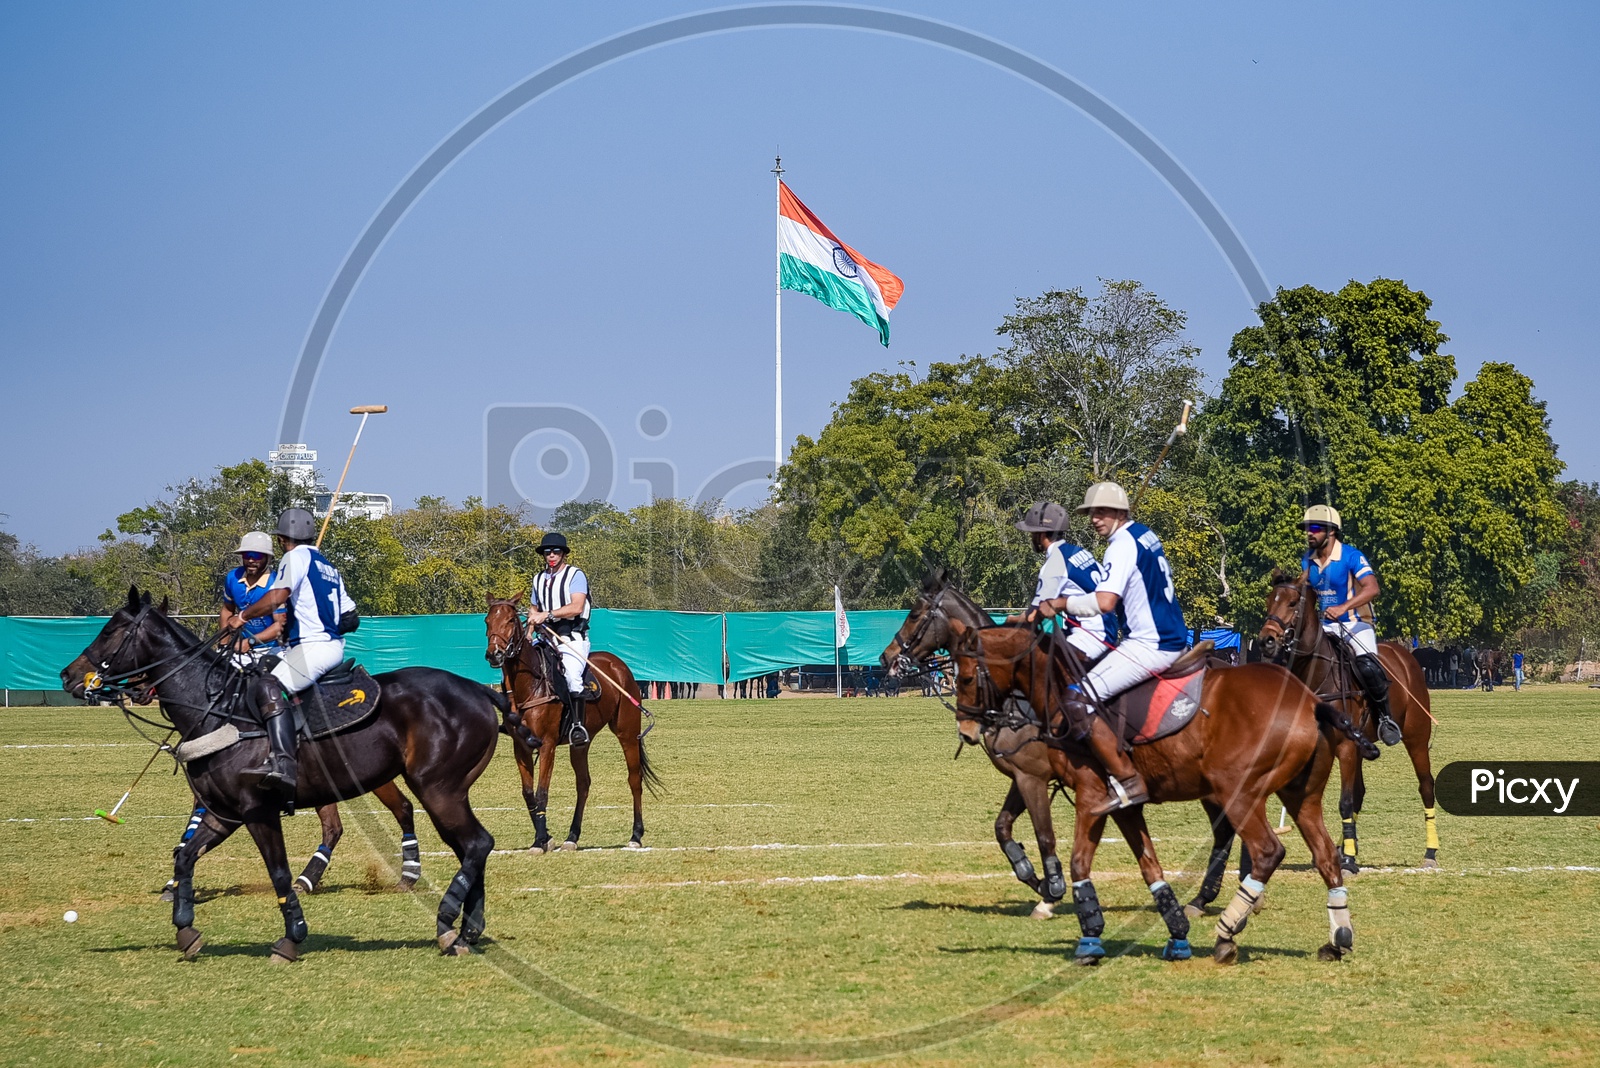 Polo Match in action.